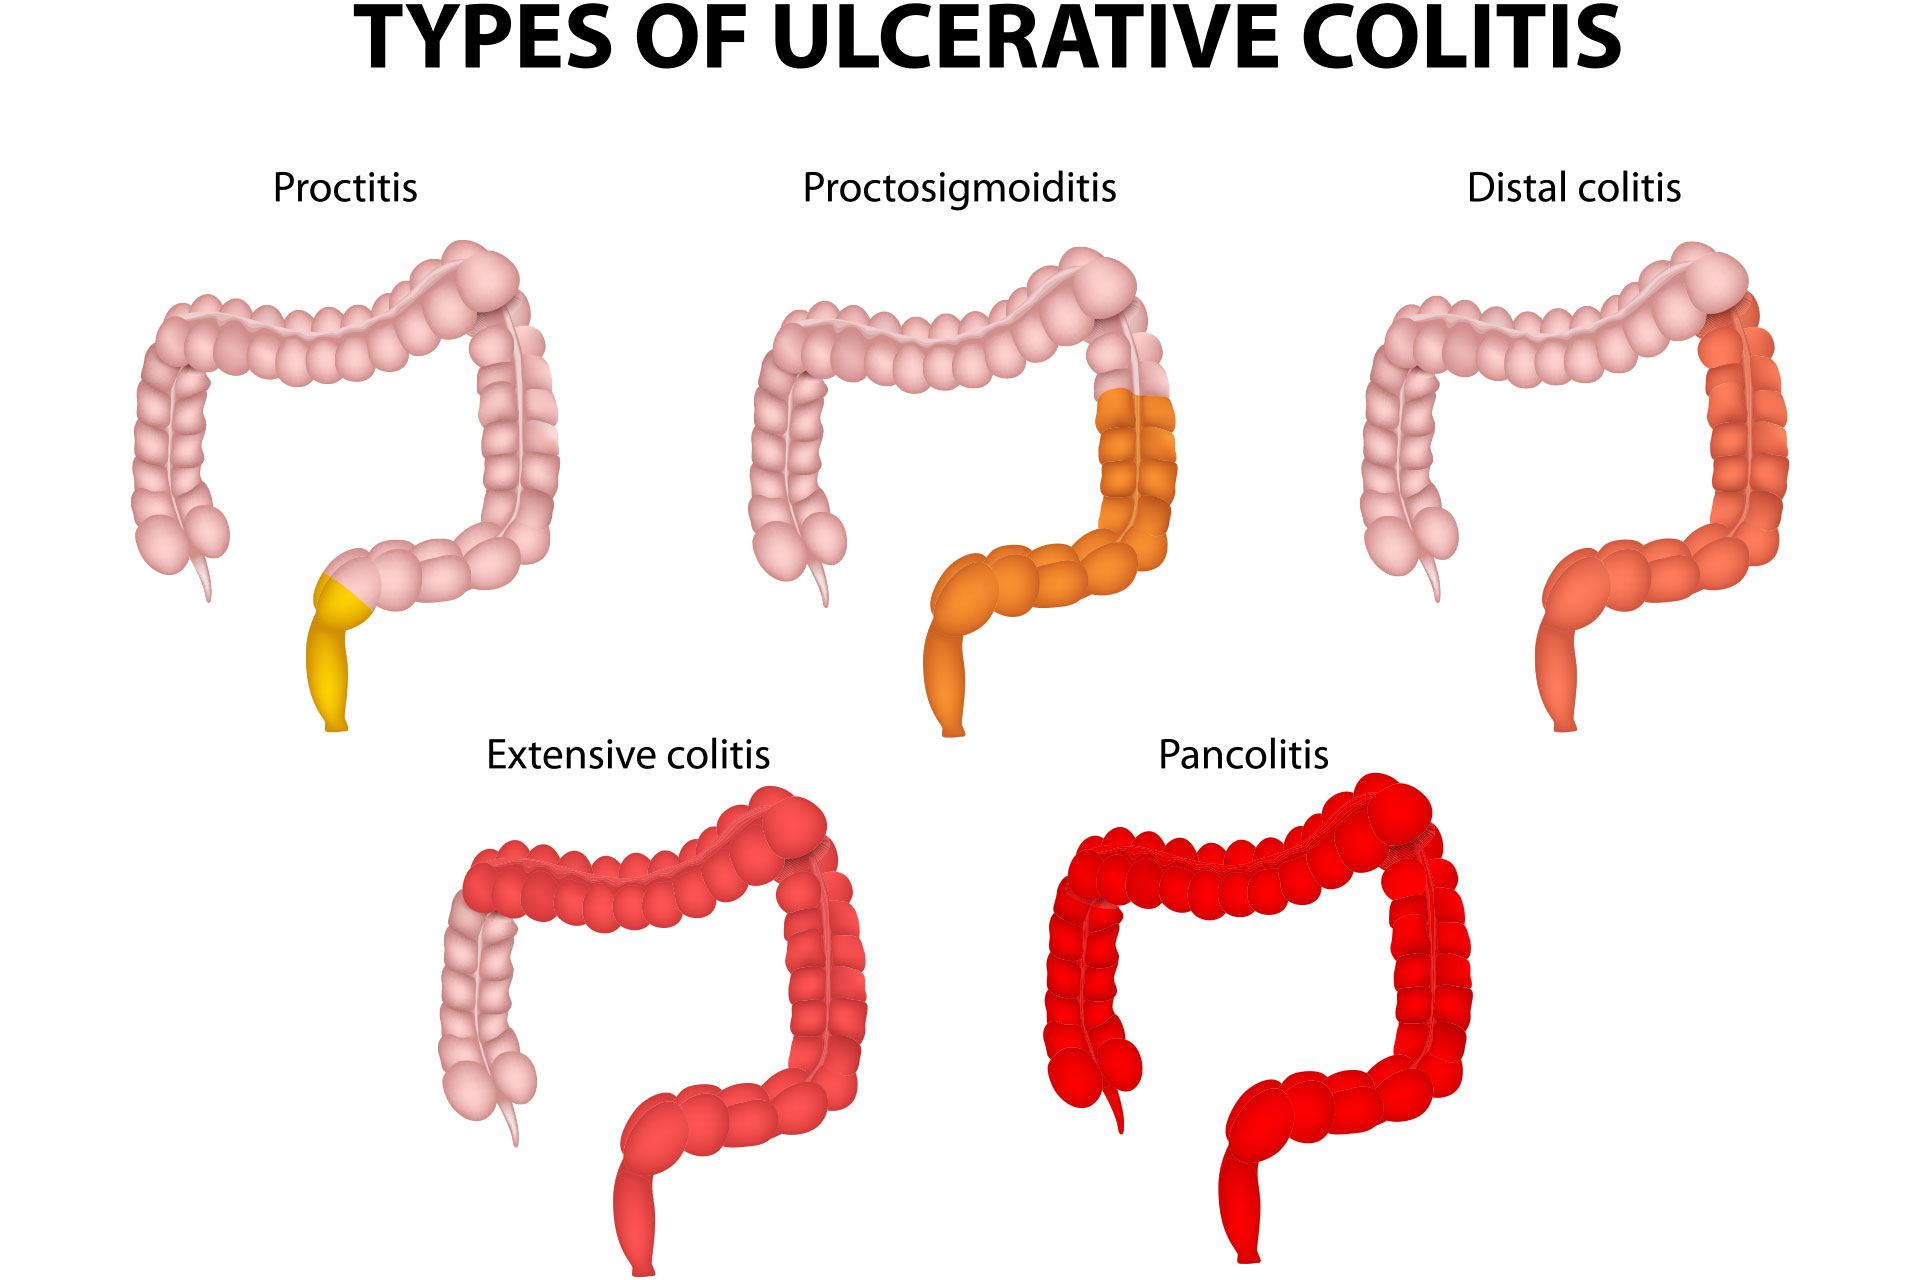 Types of ulcerative colitis